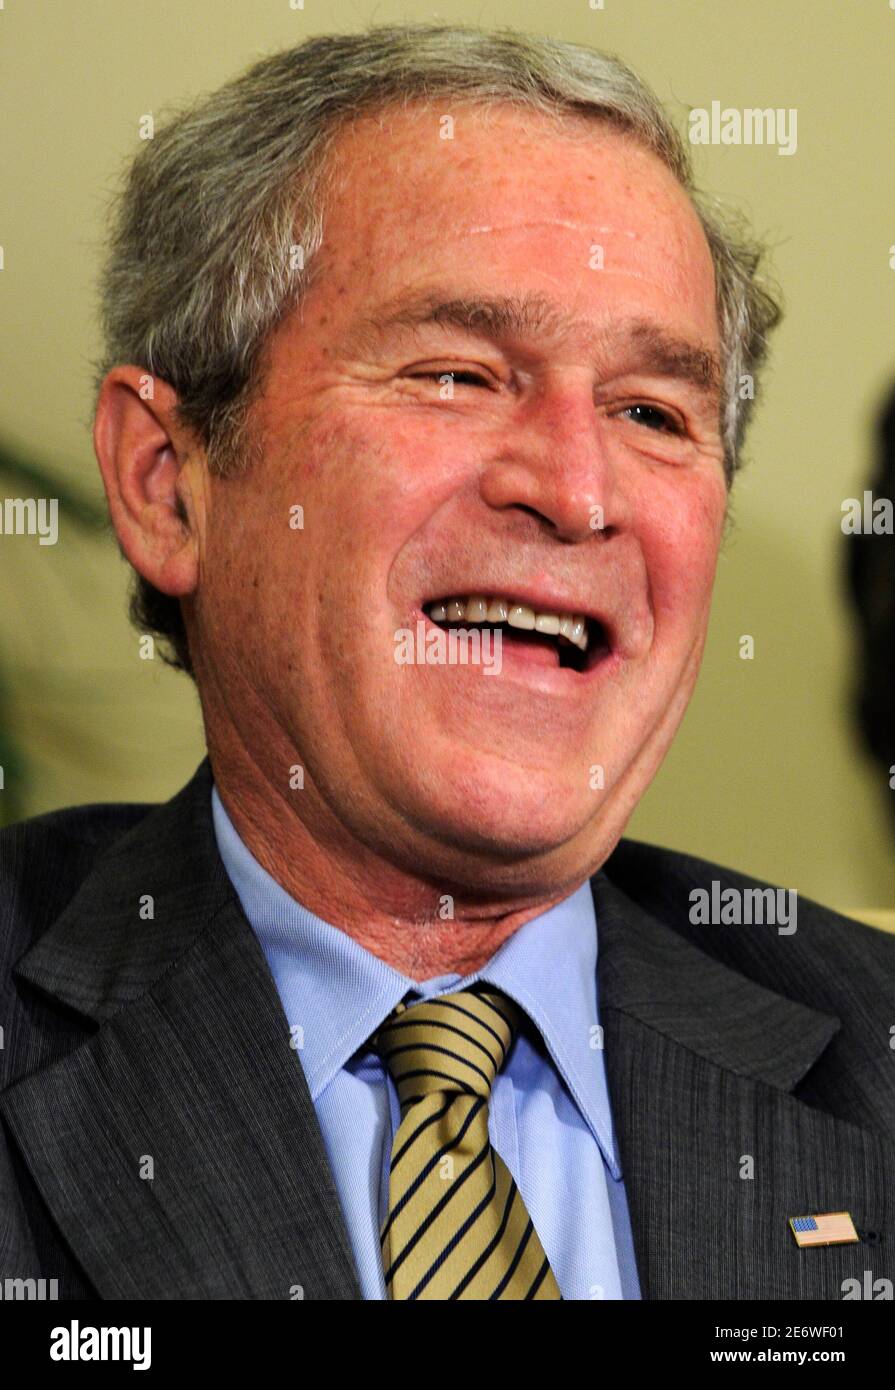 U.S. President George W. Bush laughs at remarks to the media by El Salvador's President Tony Saca after a bilateral meeting in the Oval Office at the White House, December 16, 2008.     REUTERS/Mike Theiler  (UNITED STATES) Stock Photo